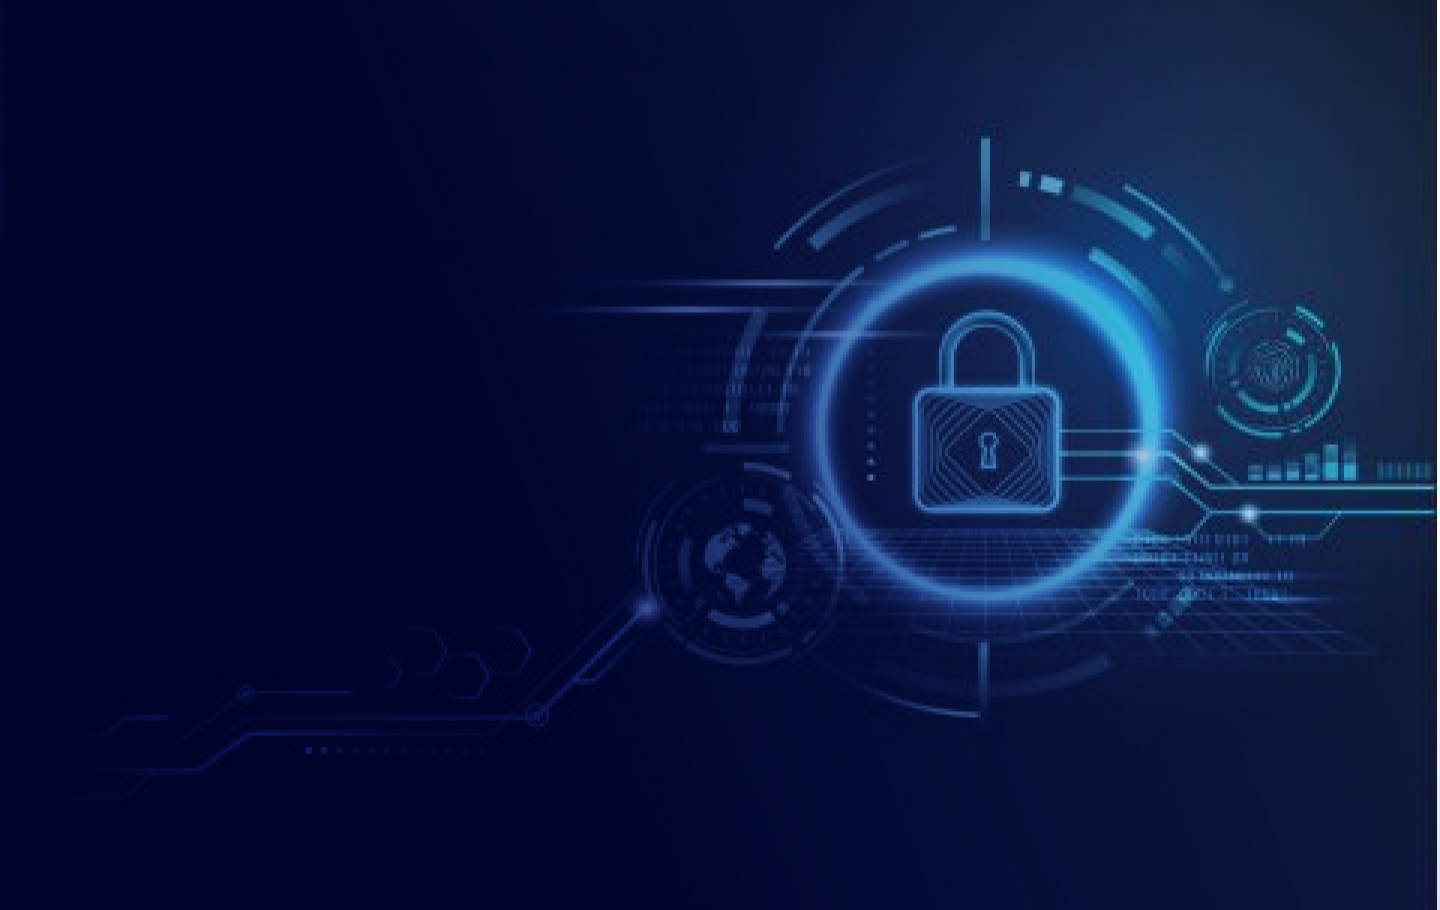 A lock image on a blue background